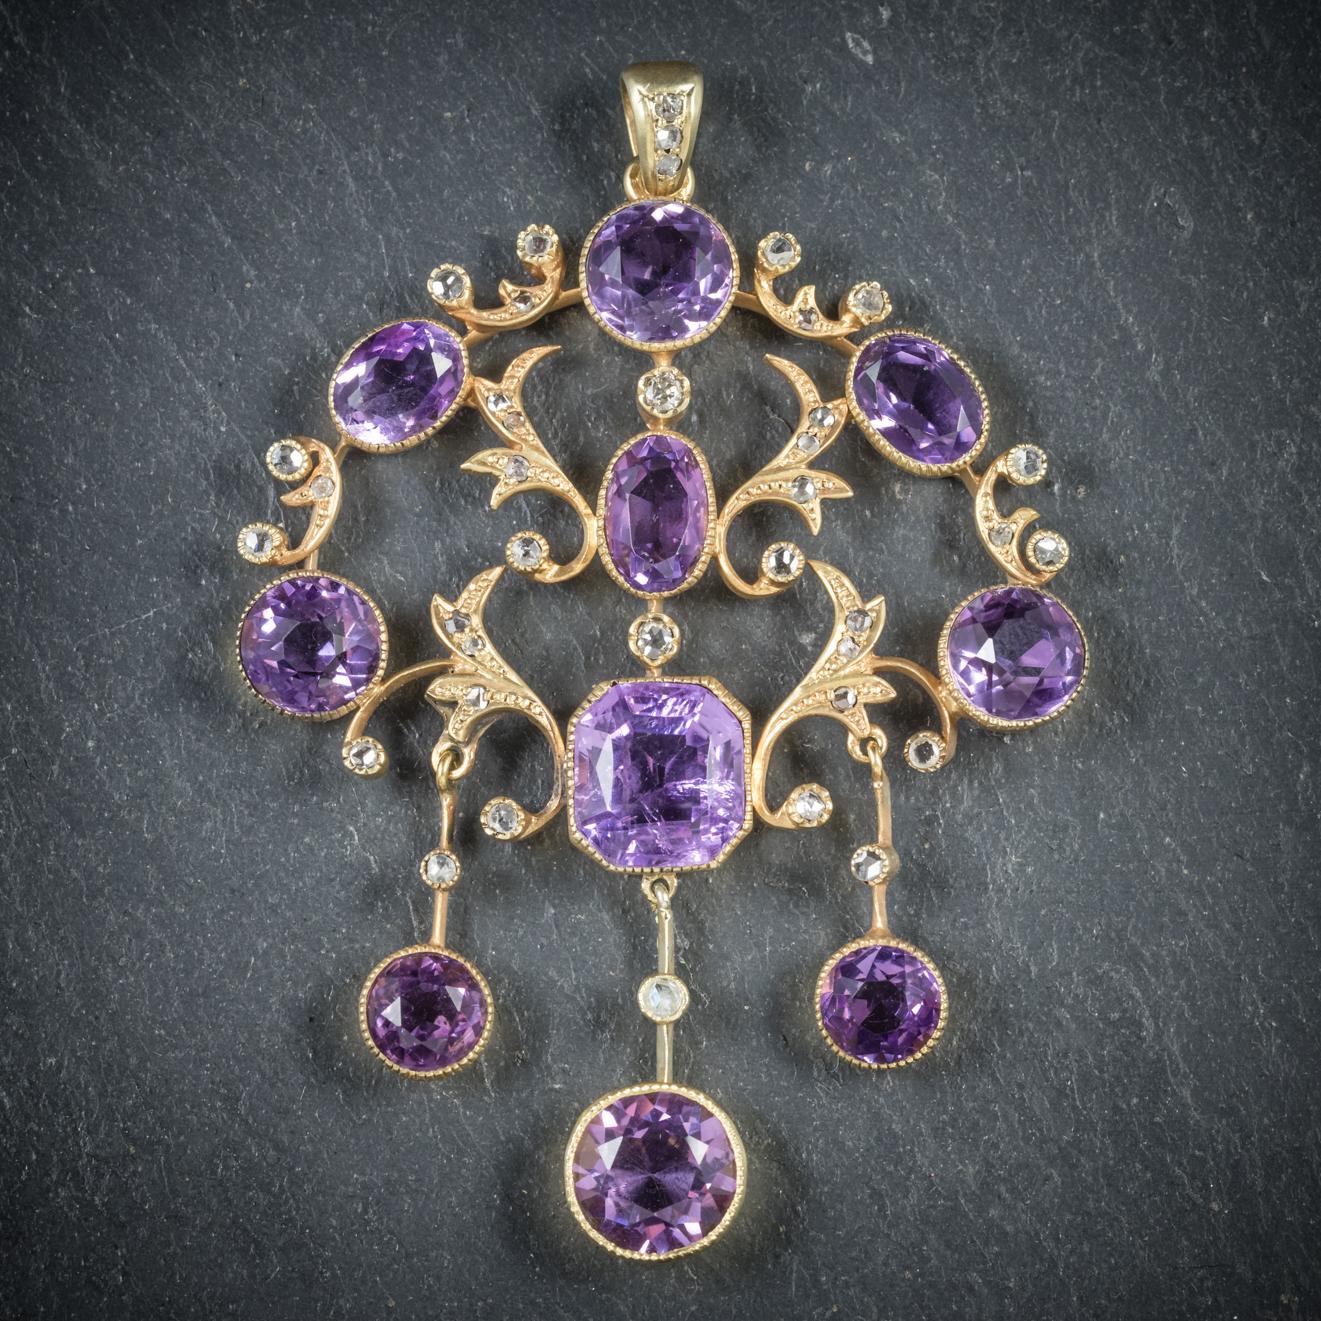 This grand antique Amethyst and Diamond Garland pendant is Victorian, Circa 1890

Ten rich purple Amethyst decorate the piece with sparkling Rose Cut Diamonds nestled in between

There are over 15ct of Amethyst in total with three fabulous Amethyst